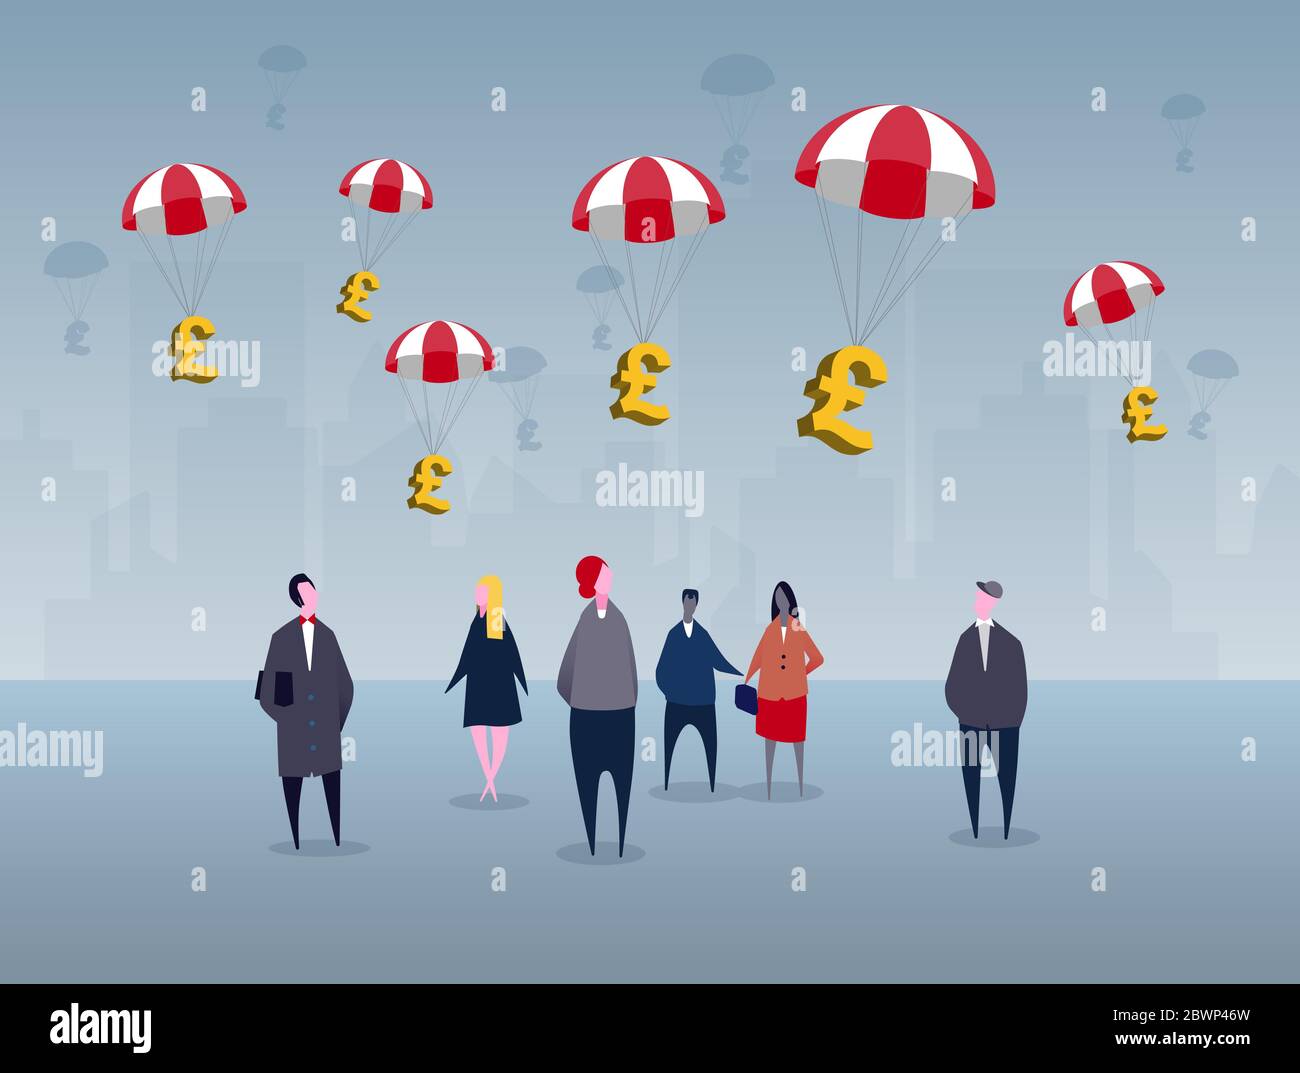 Government pounds money floating into a community. Stock Vector